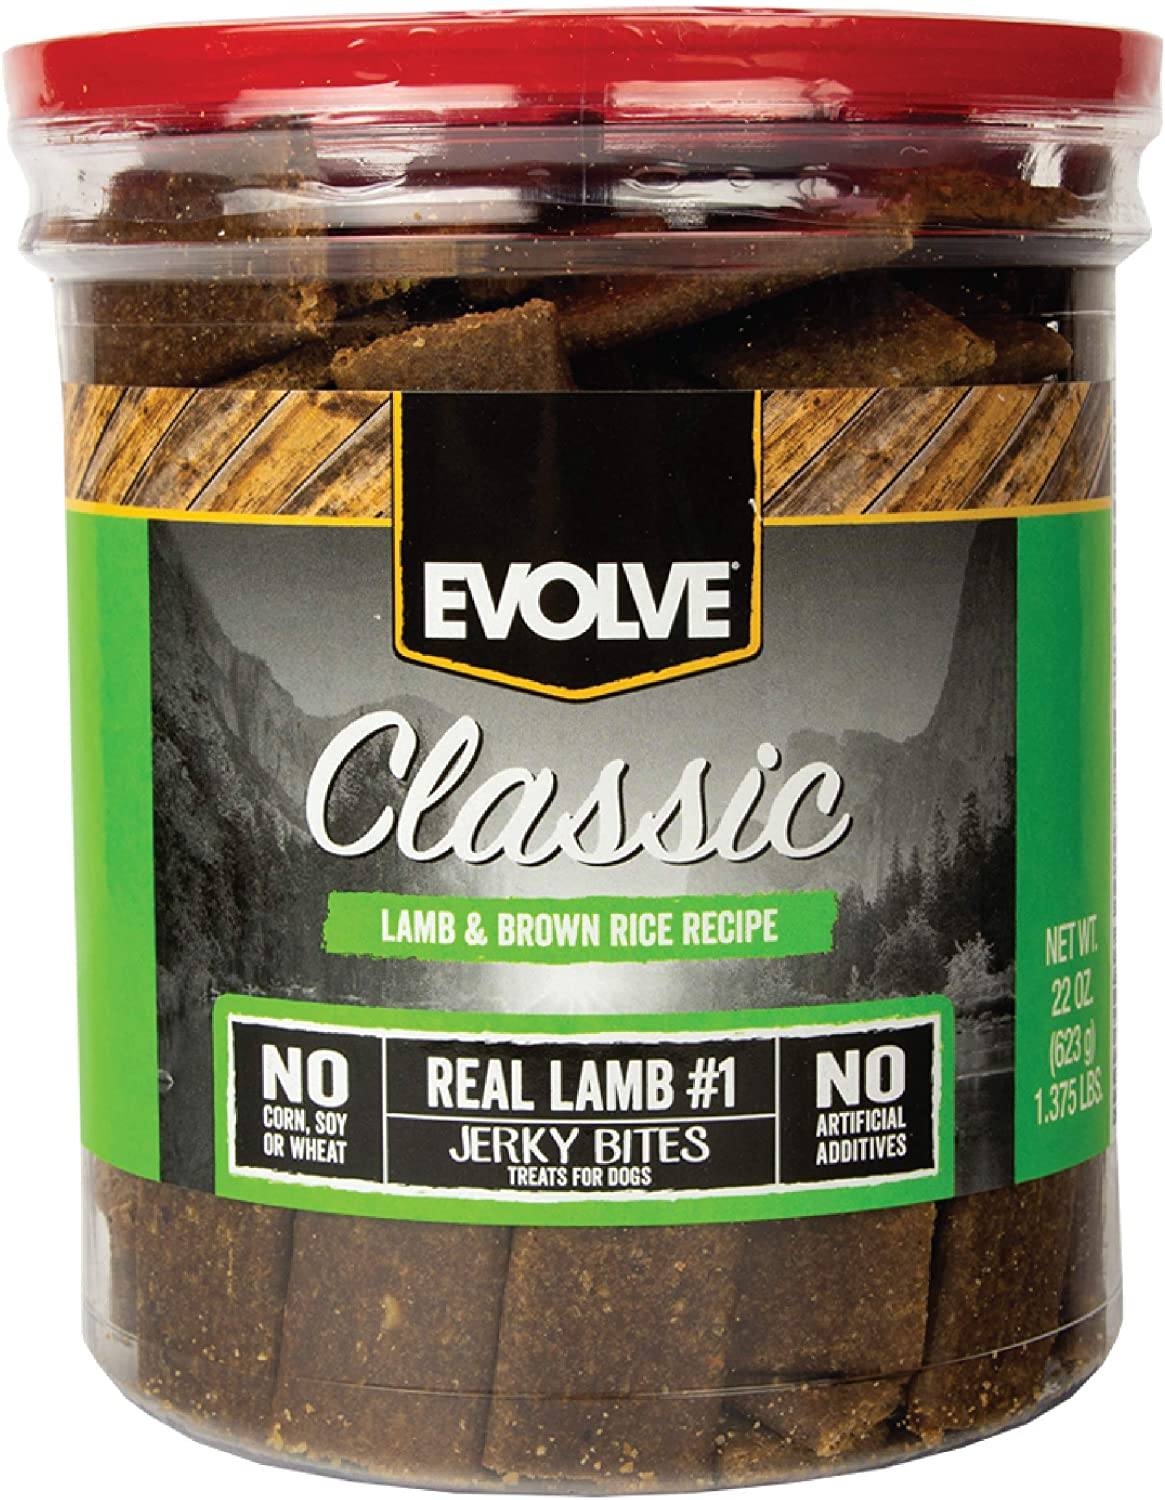 Triumph Evolve Nature's Menu Lamb & Rice Jerky Soft and Chewy Dog Treats - 22 oz - Case of 6  